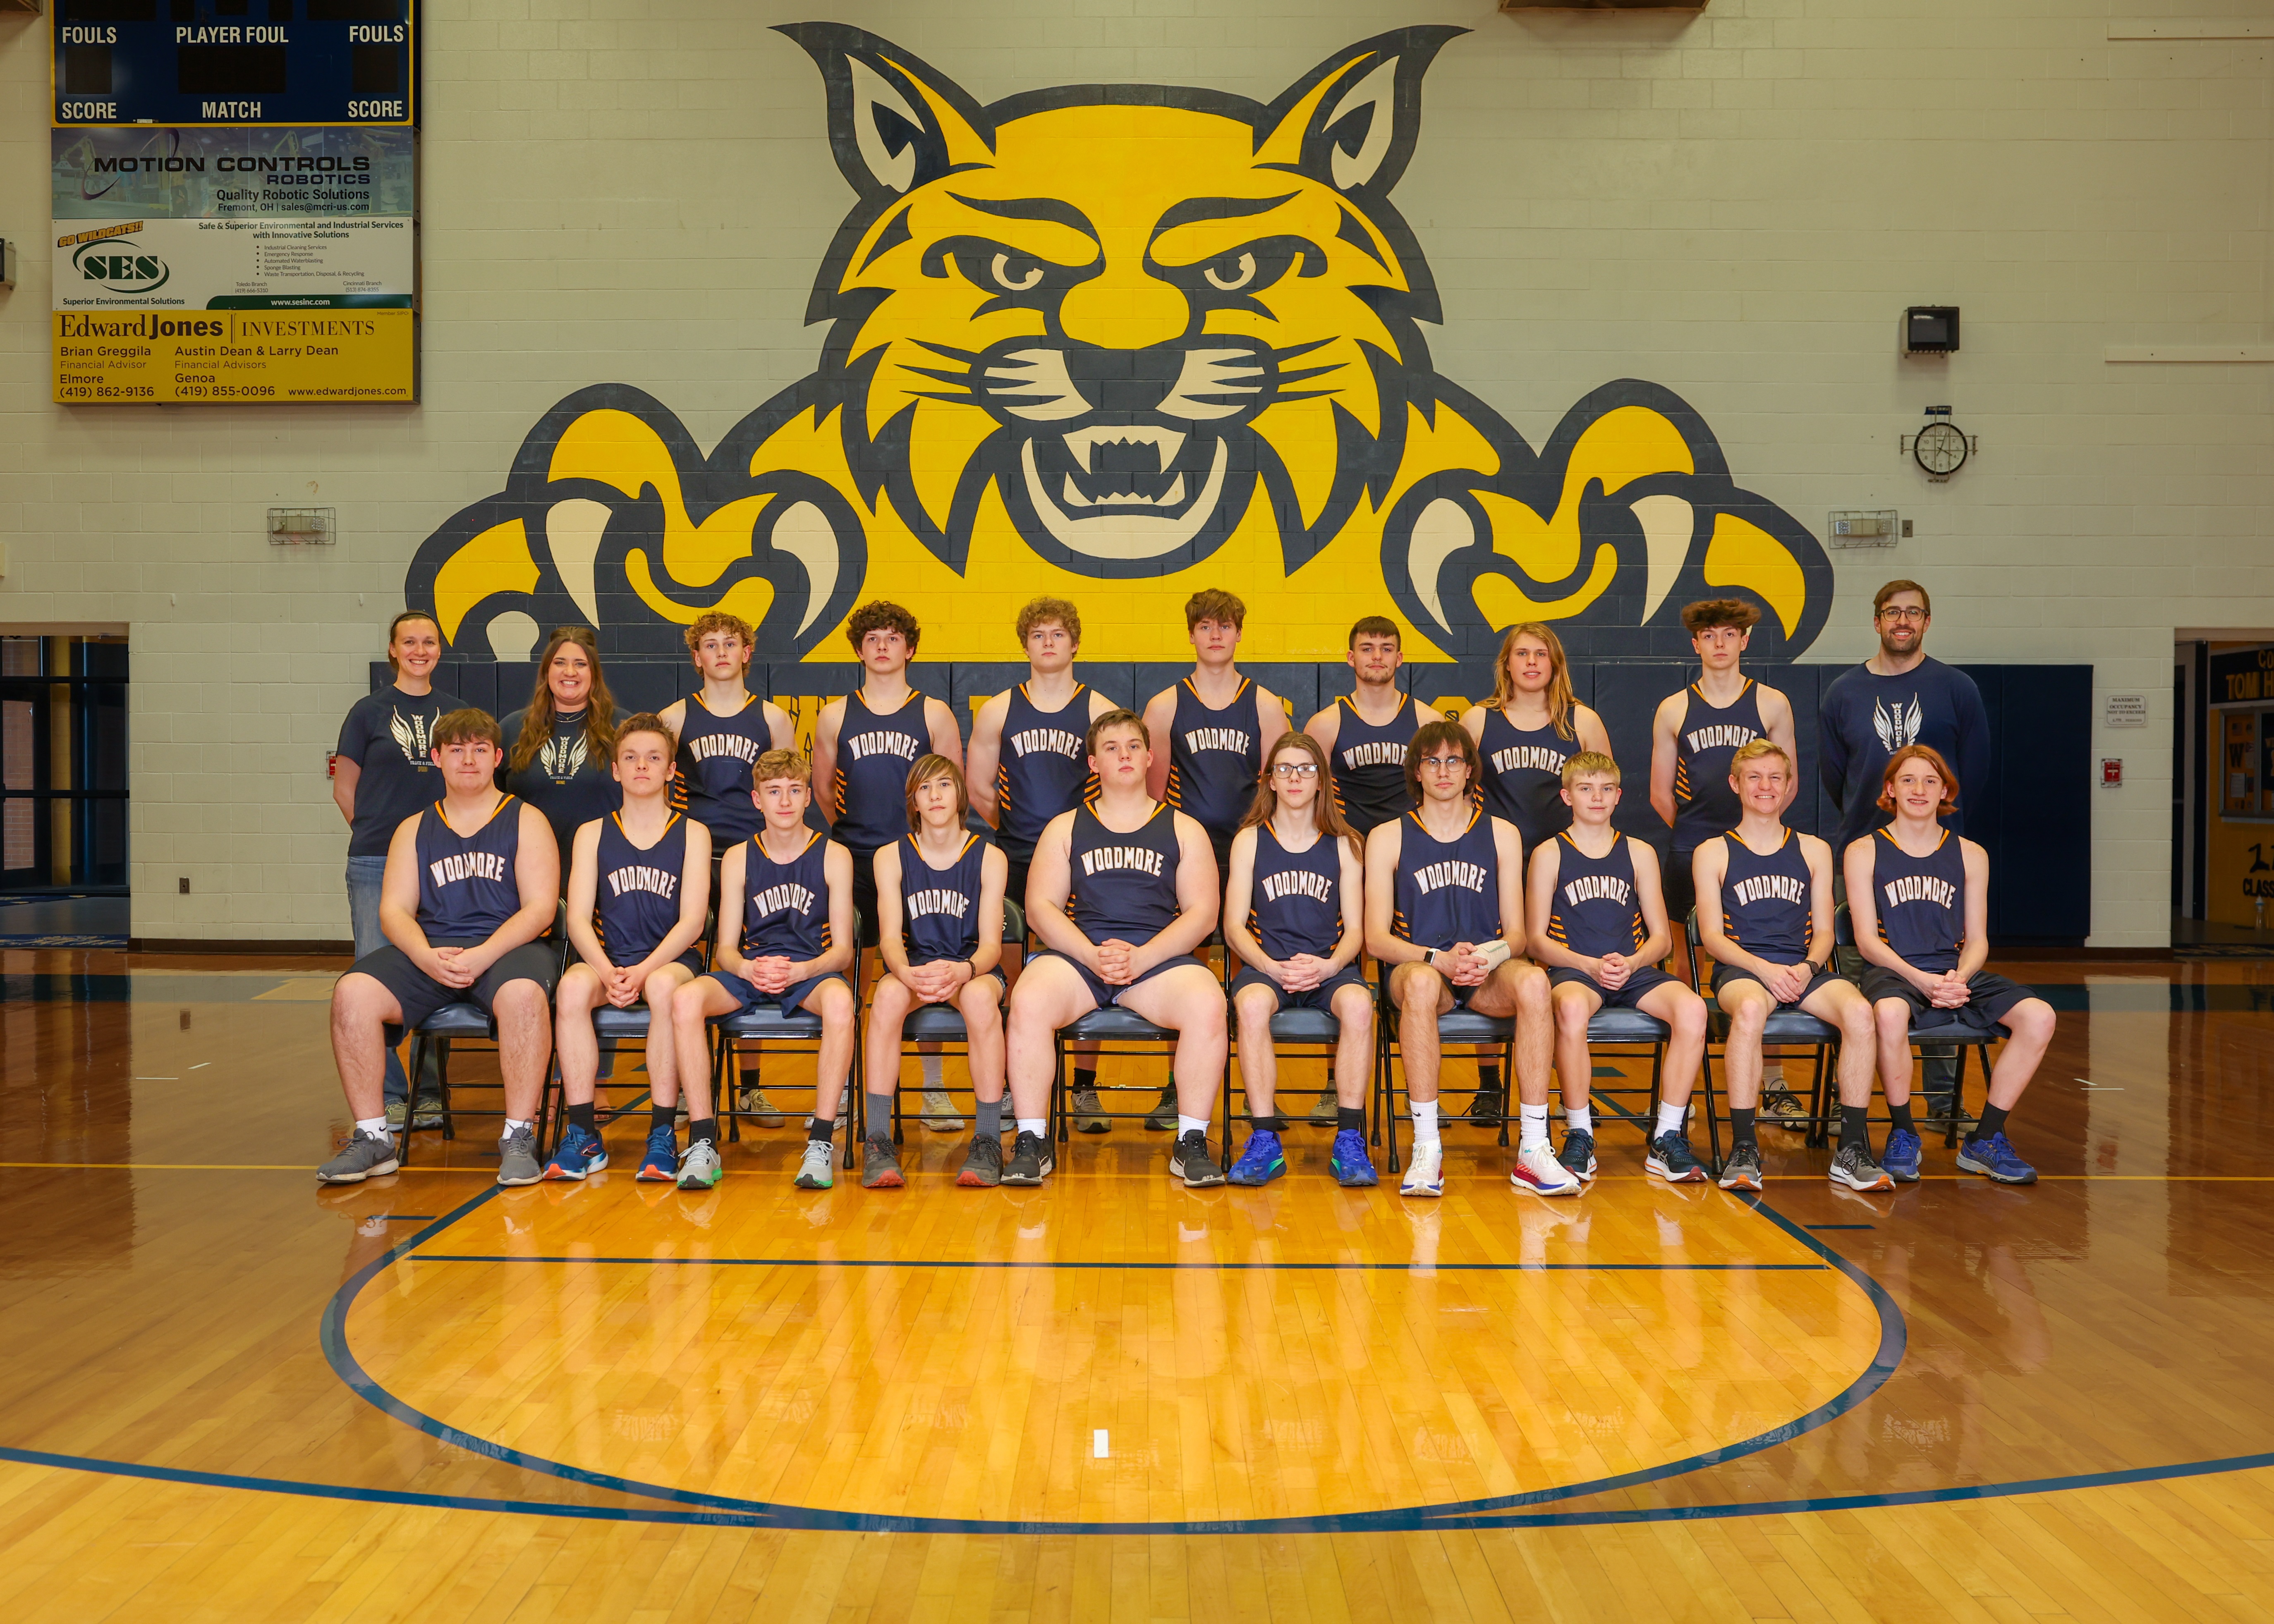 Boys track team photo in the basketball gym